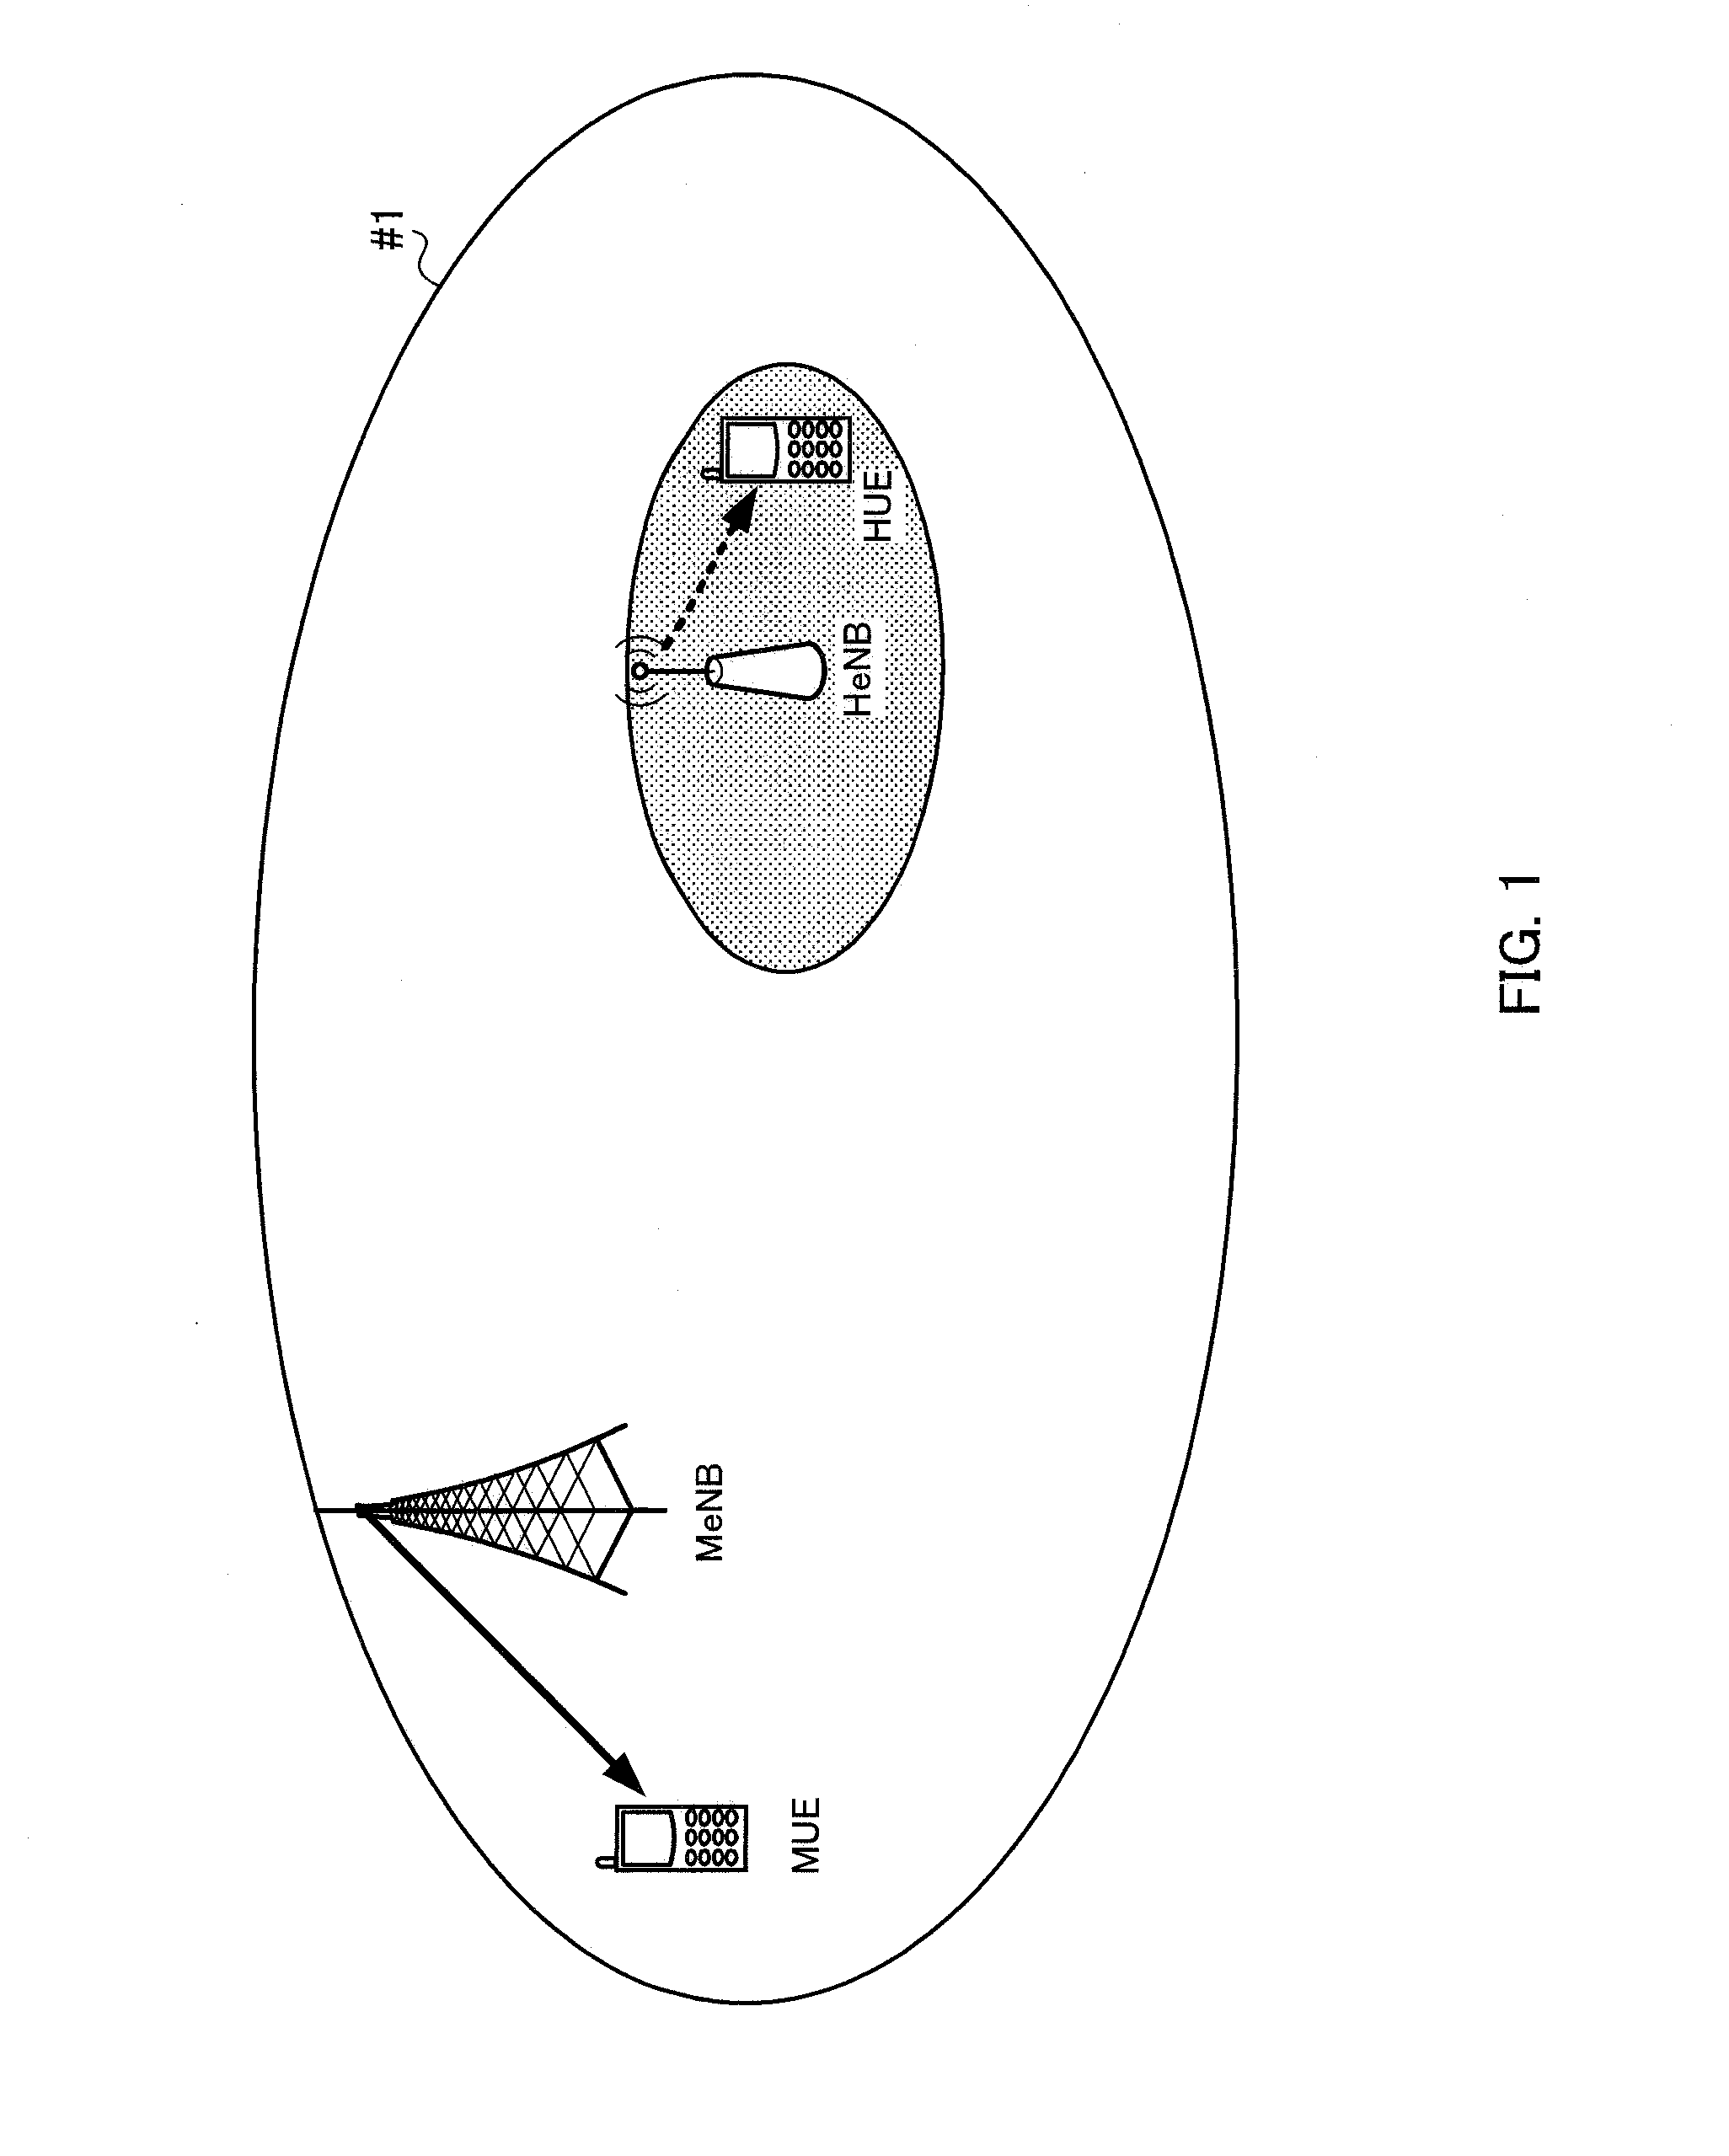 Small cell base station and victim terminal device detection method